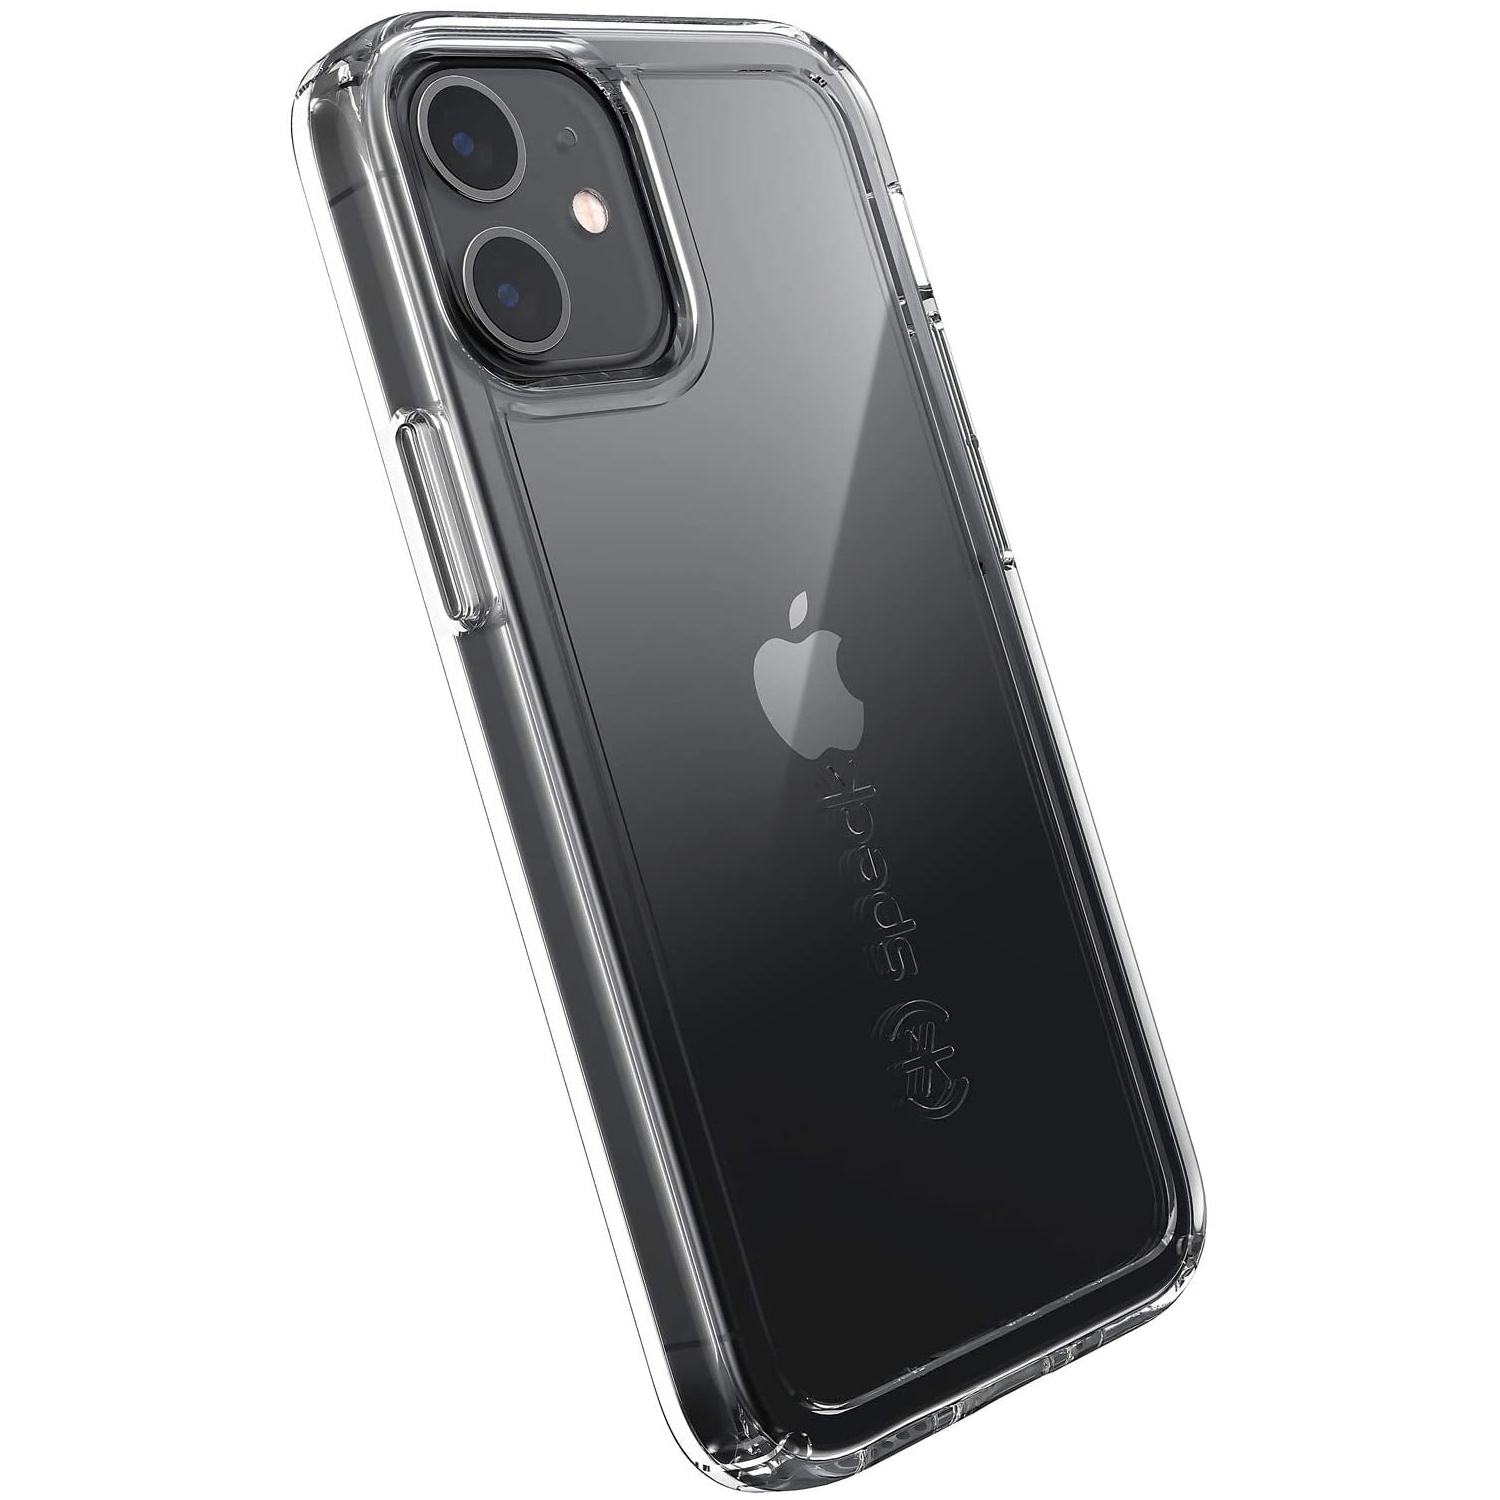 Speck GemShell iPhone 12 Mini Case, Clear/Clear